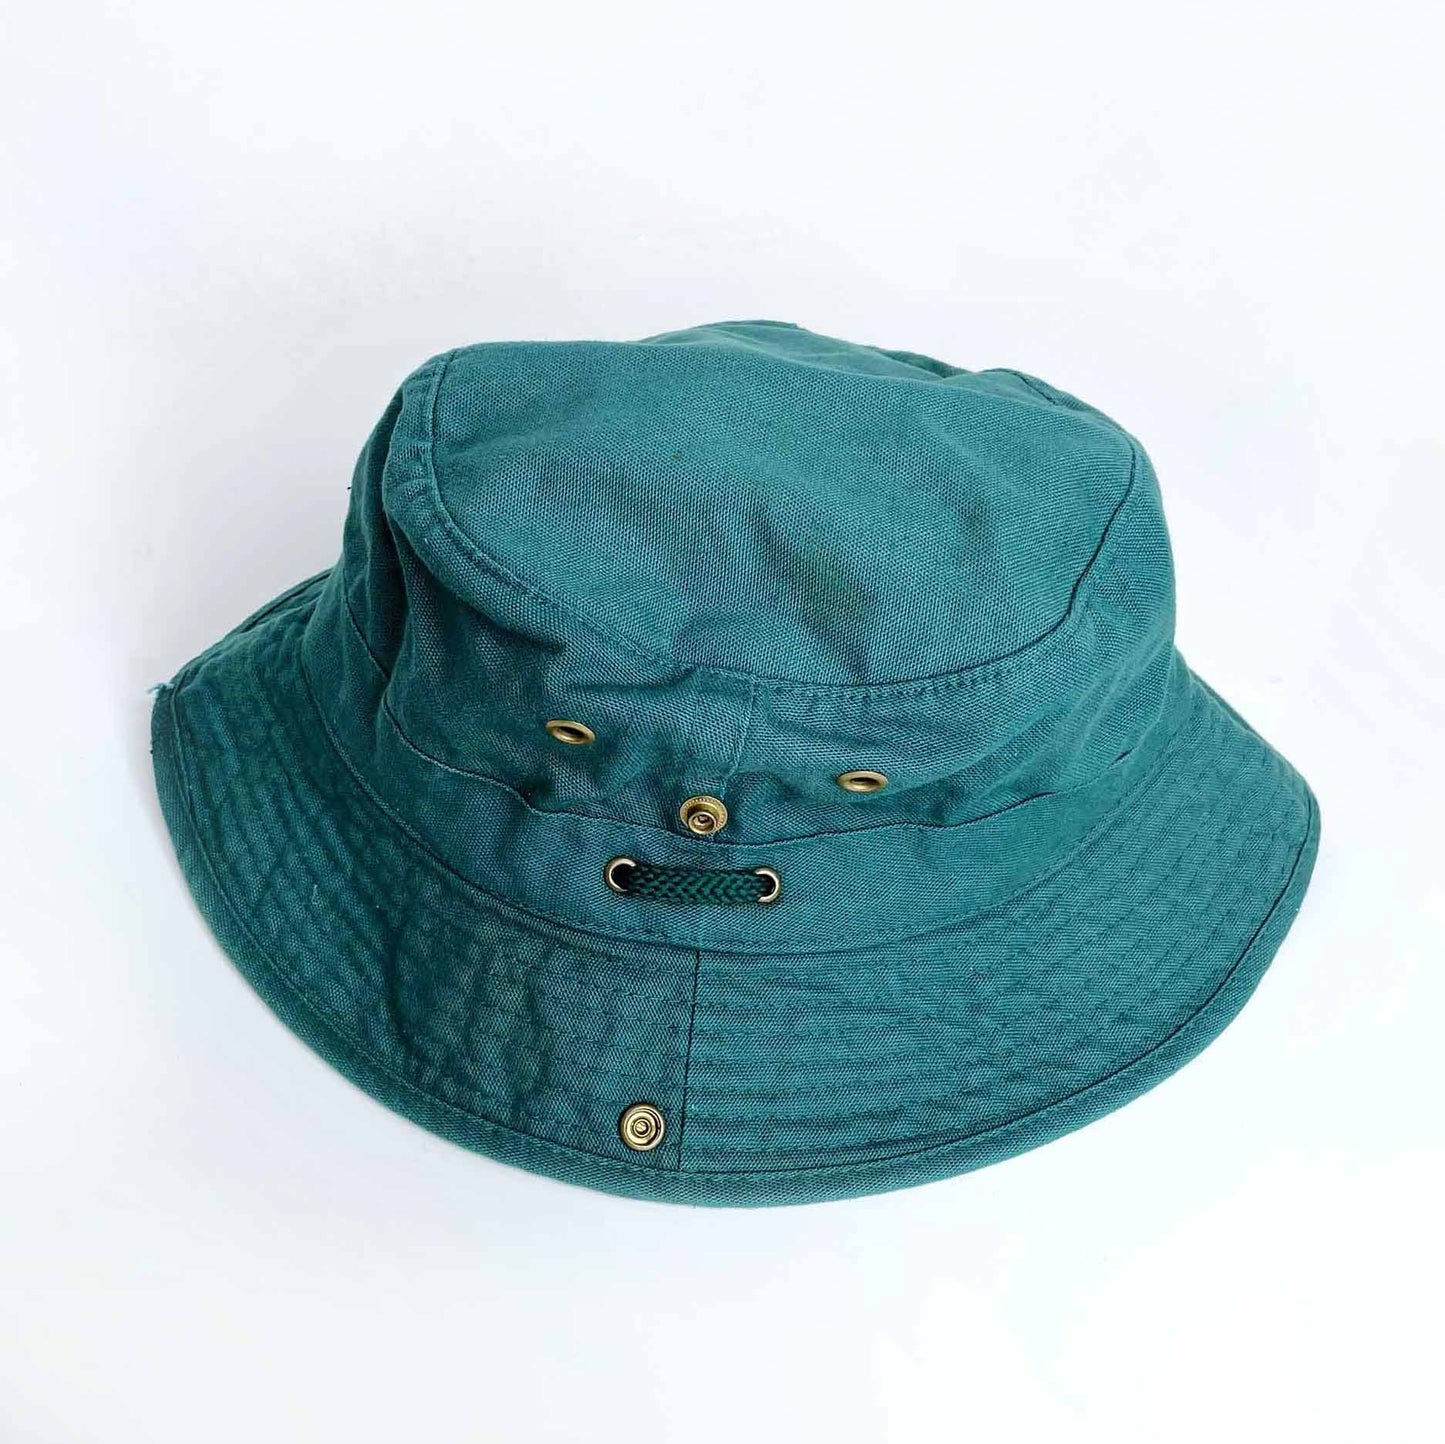 vintage kp cotton side snap outdoors bucket hat - o/s